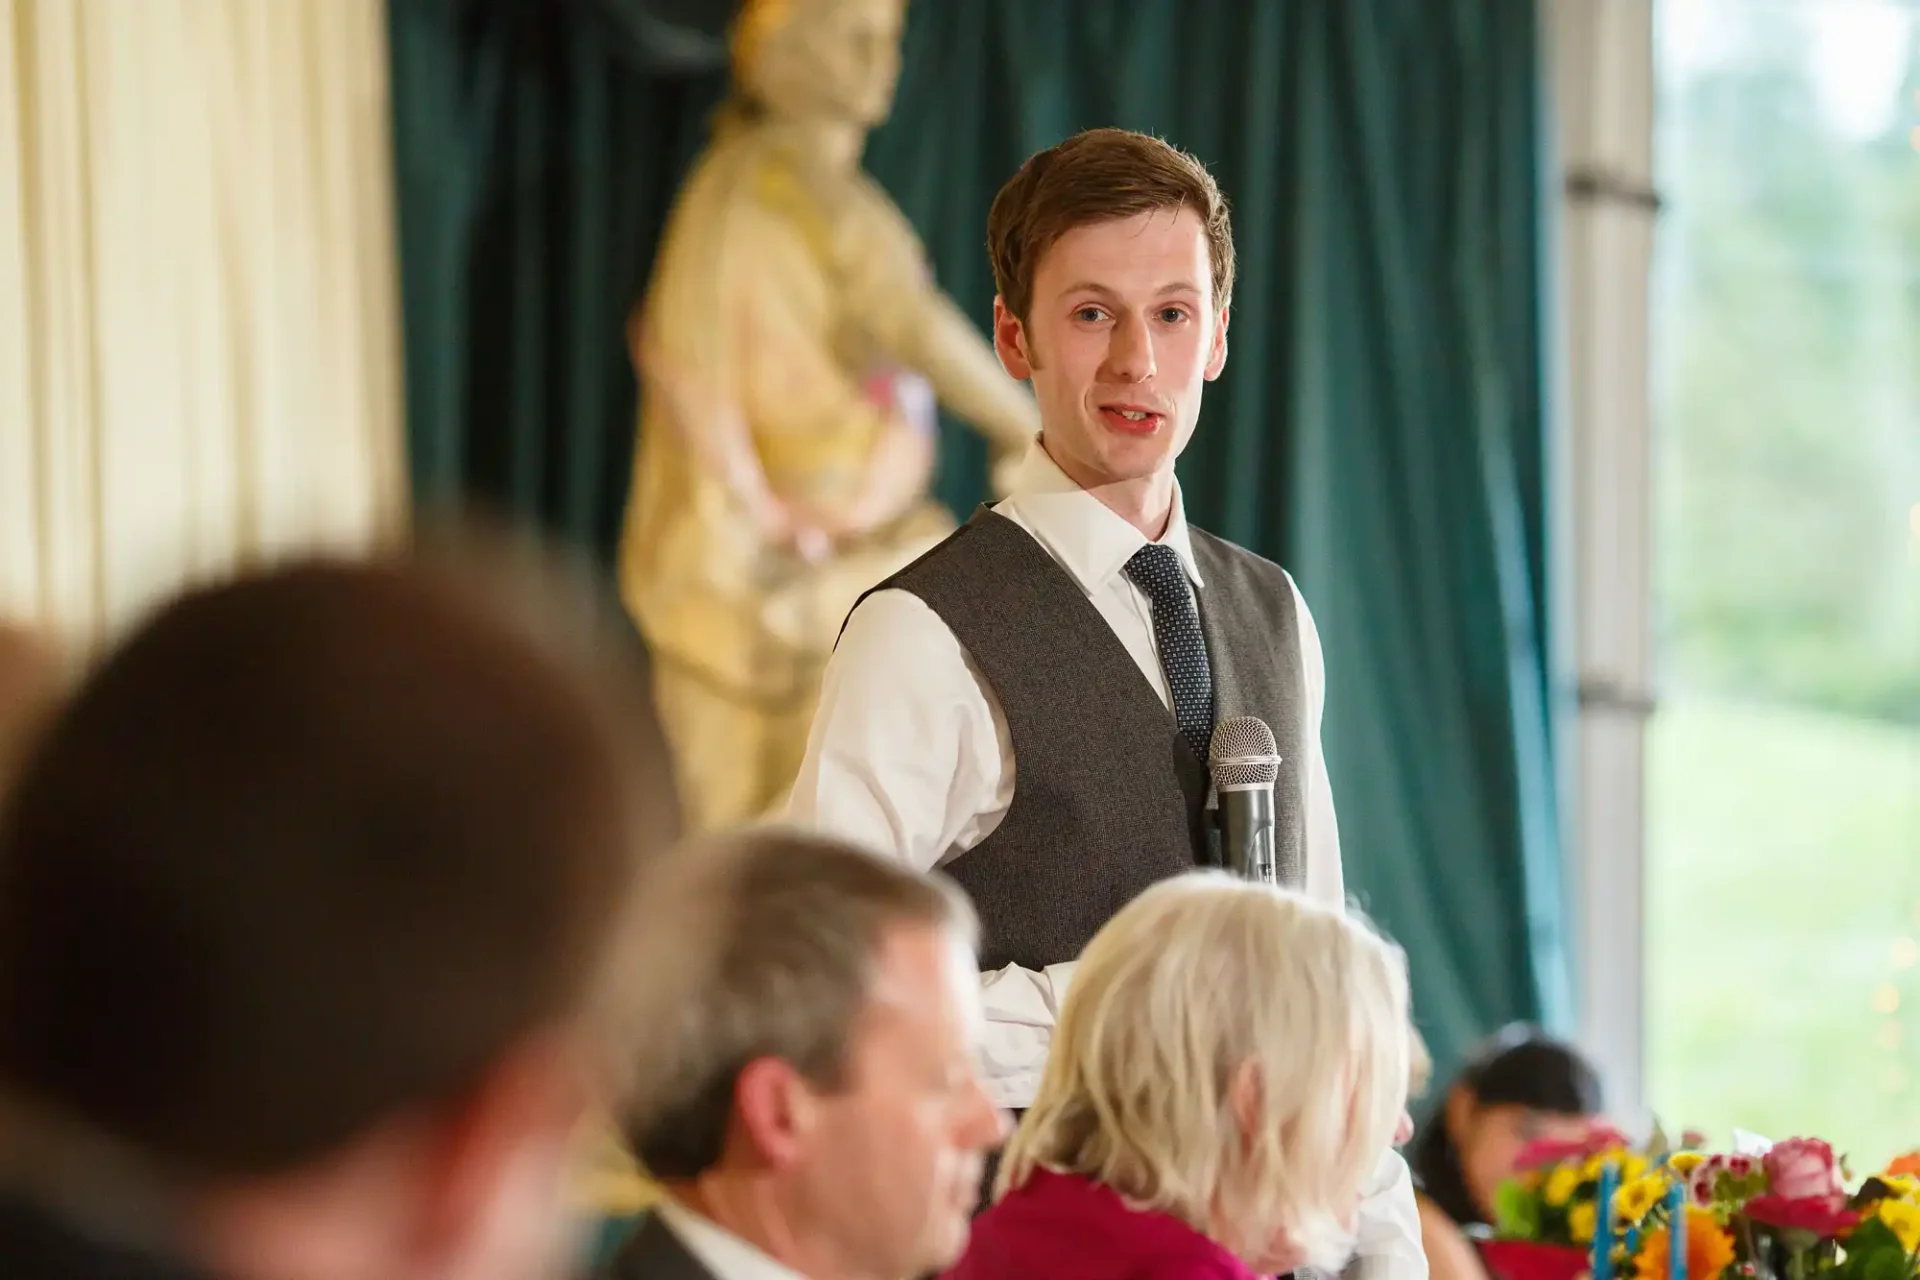 A young man in a vest and tie speaks into a microphone at an event, with guests in the foreground and a statue in the background.